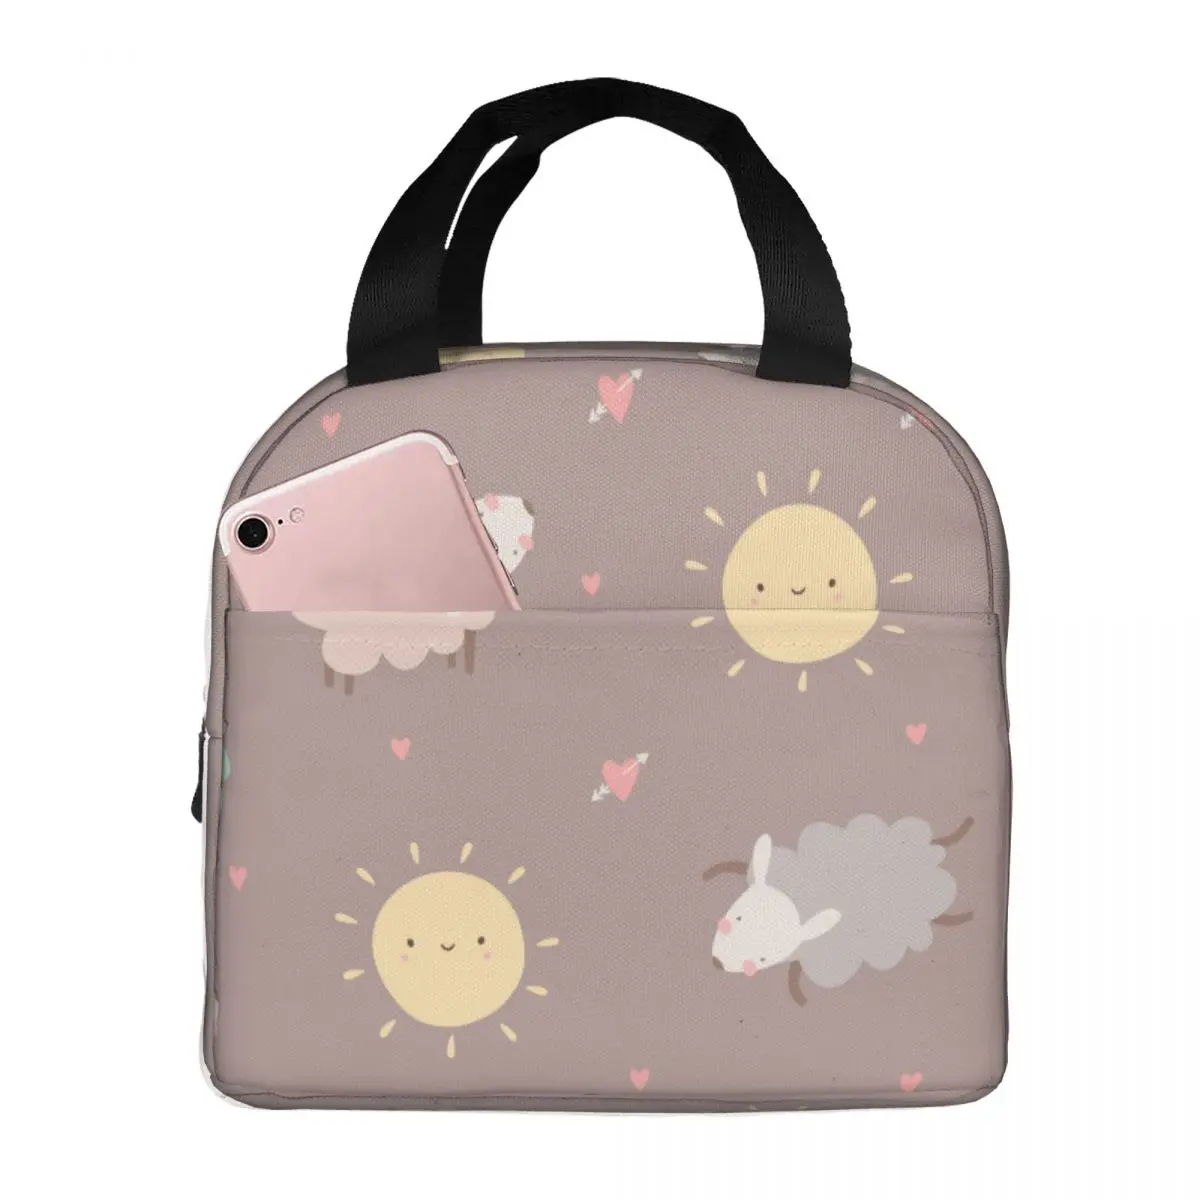 

Cute Sheep Sun Lunch Food Box Bag Insulated Thermal Food Picnic Lunch Bag for Women kids Men Cooler Tote Bag